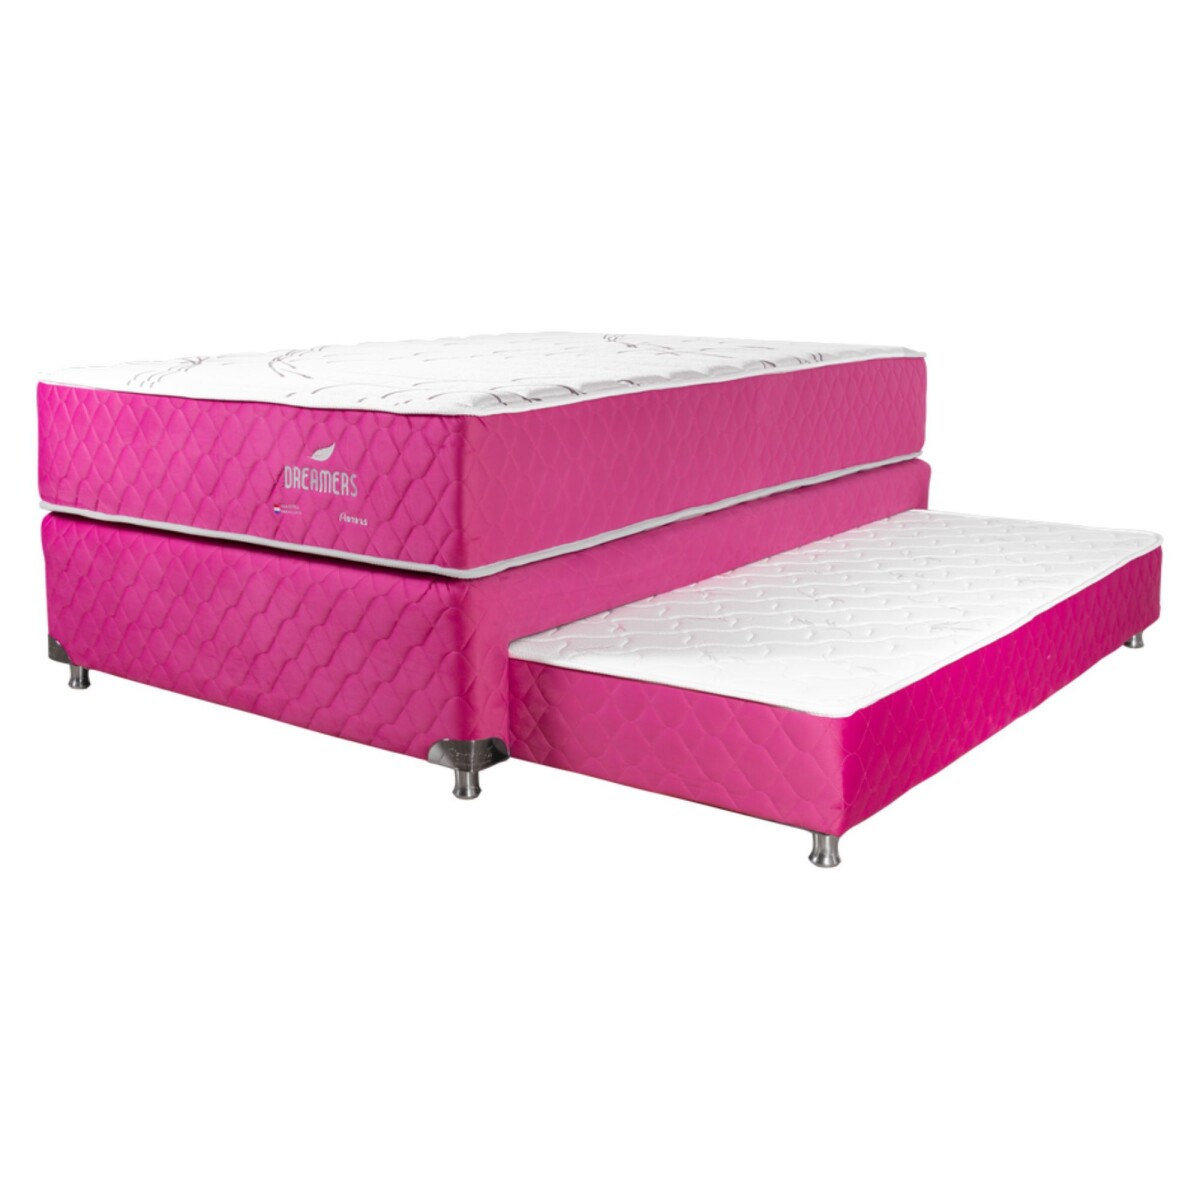 Sommier Juego Dreamers (BaseColAux) 1,20x1,90 - Rosa 